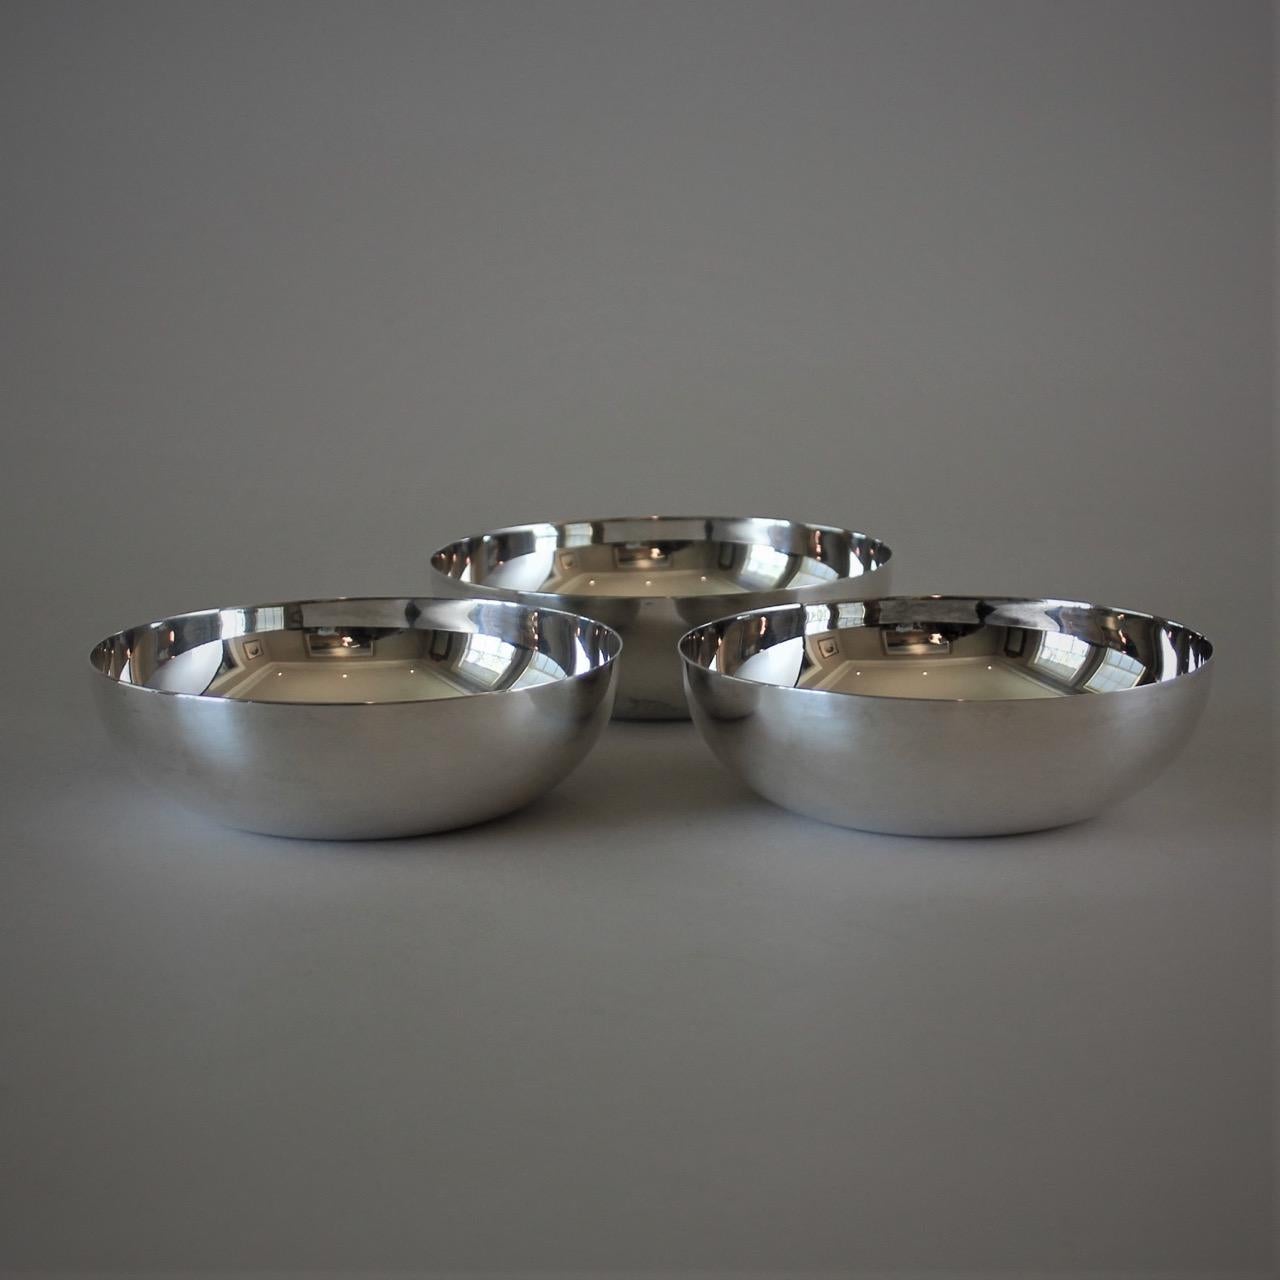 Vintage Christofle France silver plated set of 3 modern bowls.

Perfect for serving snacks

Very good value, priced at less than half of new production

All made in France and fully hallmarked.

Excellent Condition.

Each piece comes with